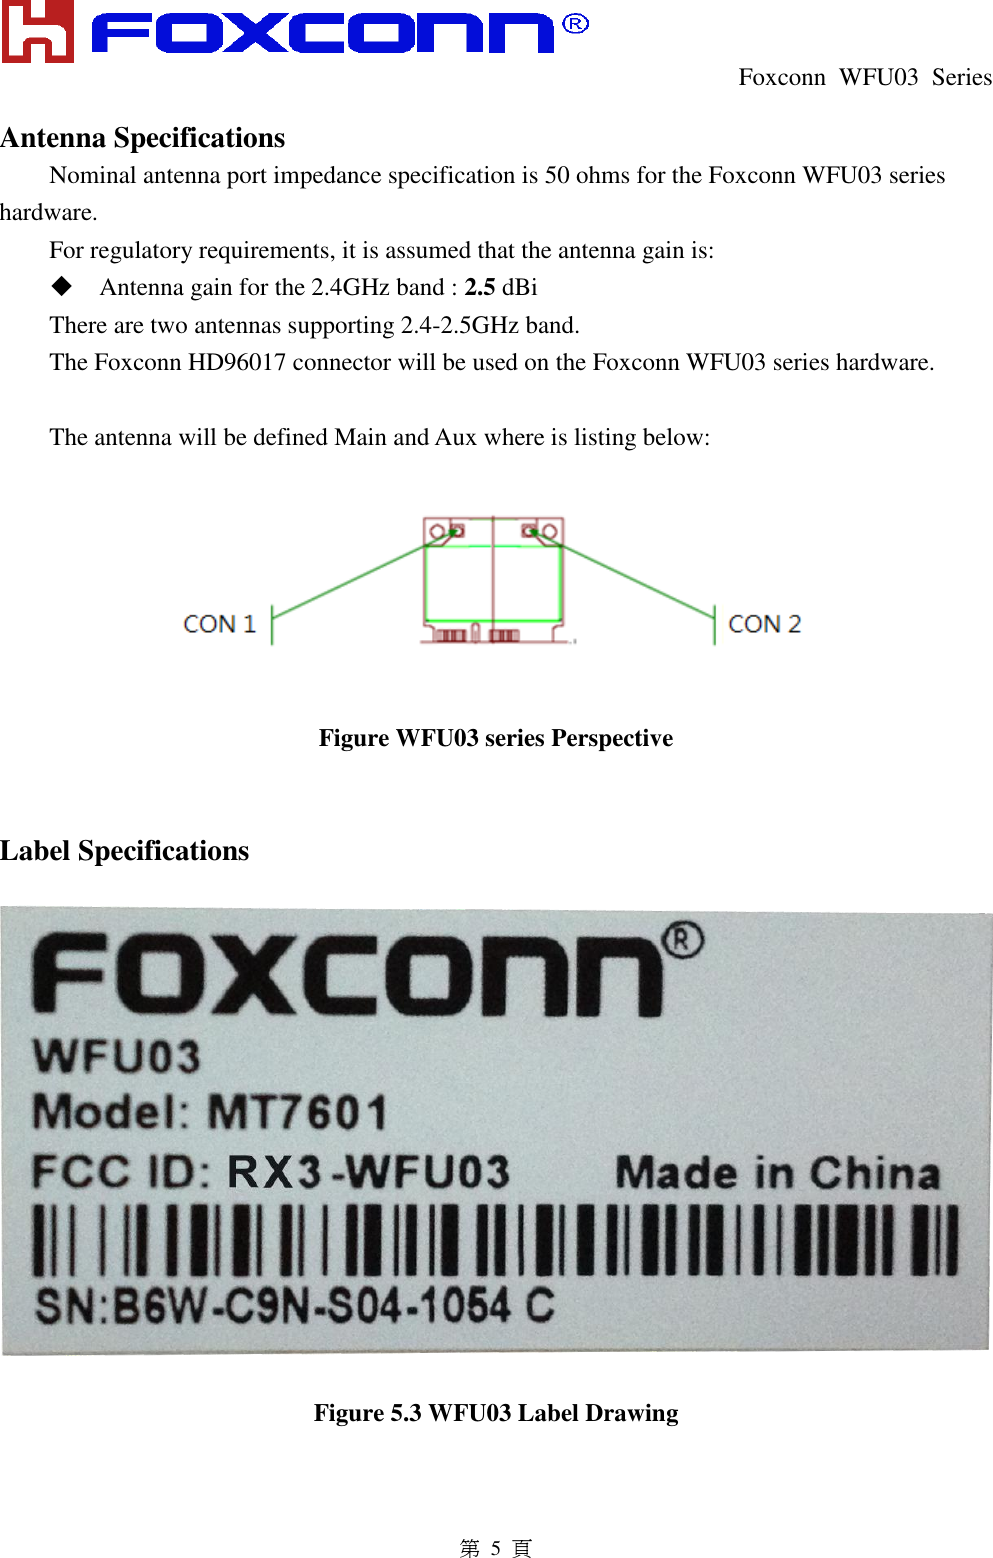  Foxconn  WFU03  Series   第 5 頁 Antenna Specifications Nominal antenna port impedance specification is 50 ohms for the Foxconn WFU03 series hardware. For regulatory requirements, it is assumed that the antenna gain is:  Antenna gain for the 2.4GHz band : 2.5 dBi There are two antennas supporting 2.4-2.5GHz band. The Foxconn HD96017 connector will be used on the Foxconn WFU03 series hardware.  The antenna will be defined Main and Aux where is listing below:    Figure WFU03 series Perspective   Label Specifications    Figure 5.3 WFU03 Label Drawing 